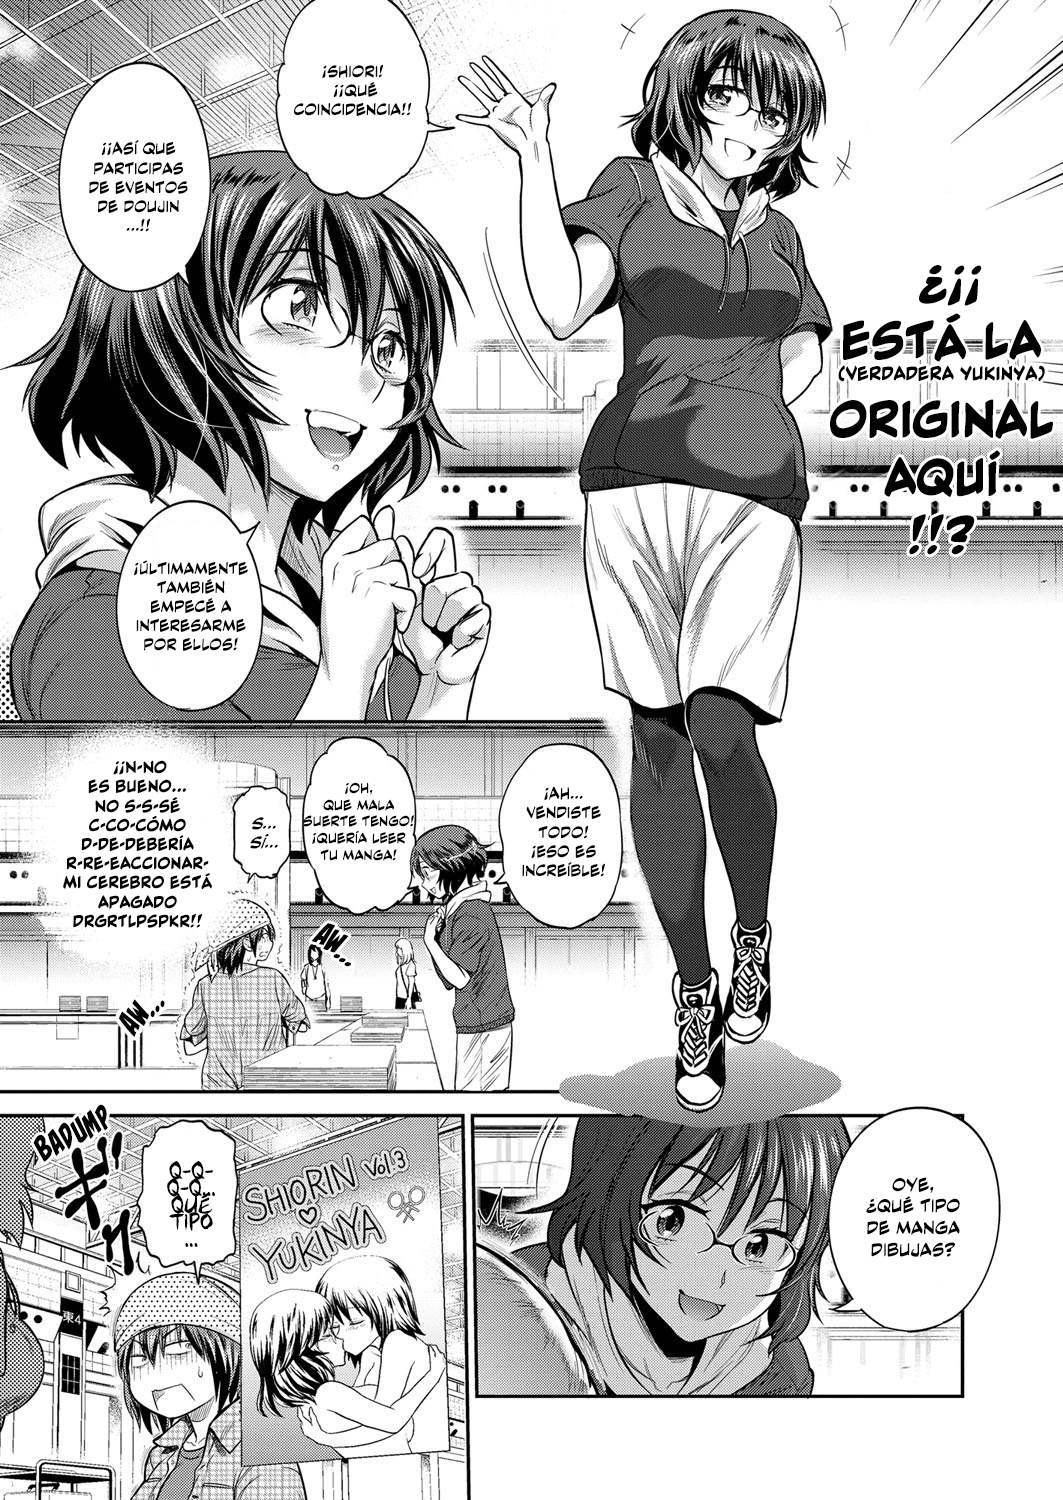 [DISTANCE] Joshi Lacu! - Girls Lacrosse Club ~2 Years Later~ Cap.08 (COMIC ExE 12) [Español] [NicoNiiScans] [Digital] [DISTANCE] じょしラク! ～2 Years Later～ 第8話 (コミック エグゼ 12) [スペイン翻訳] [DL版]